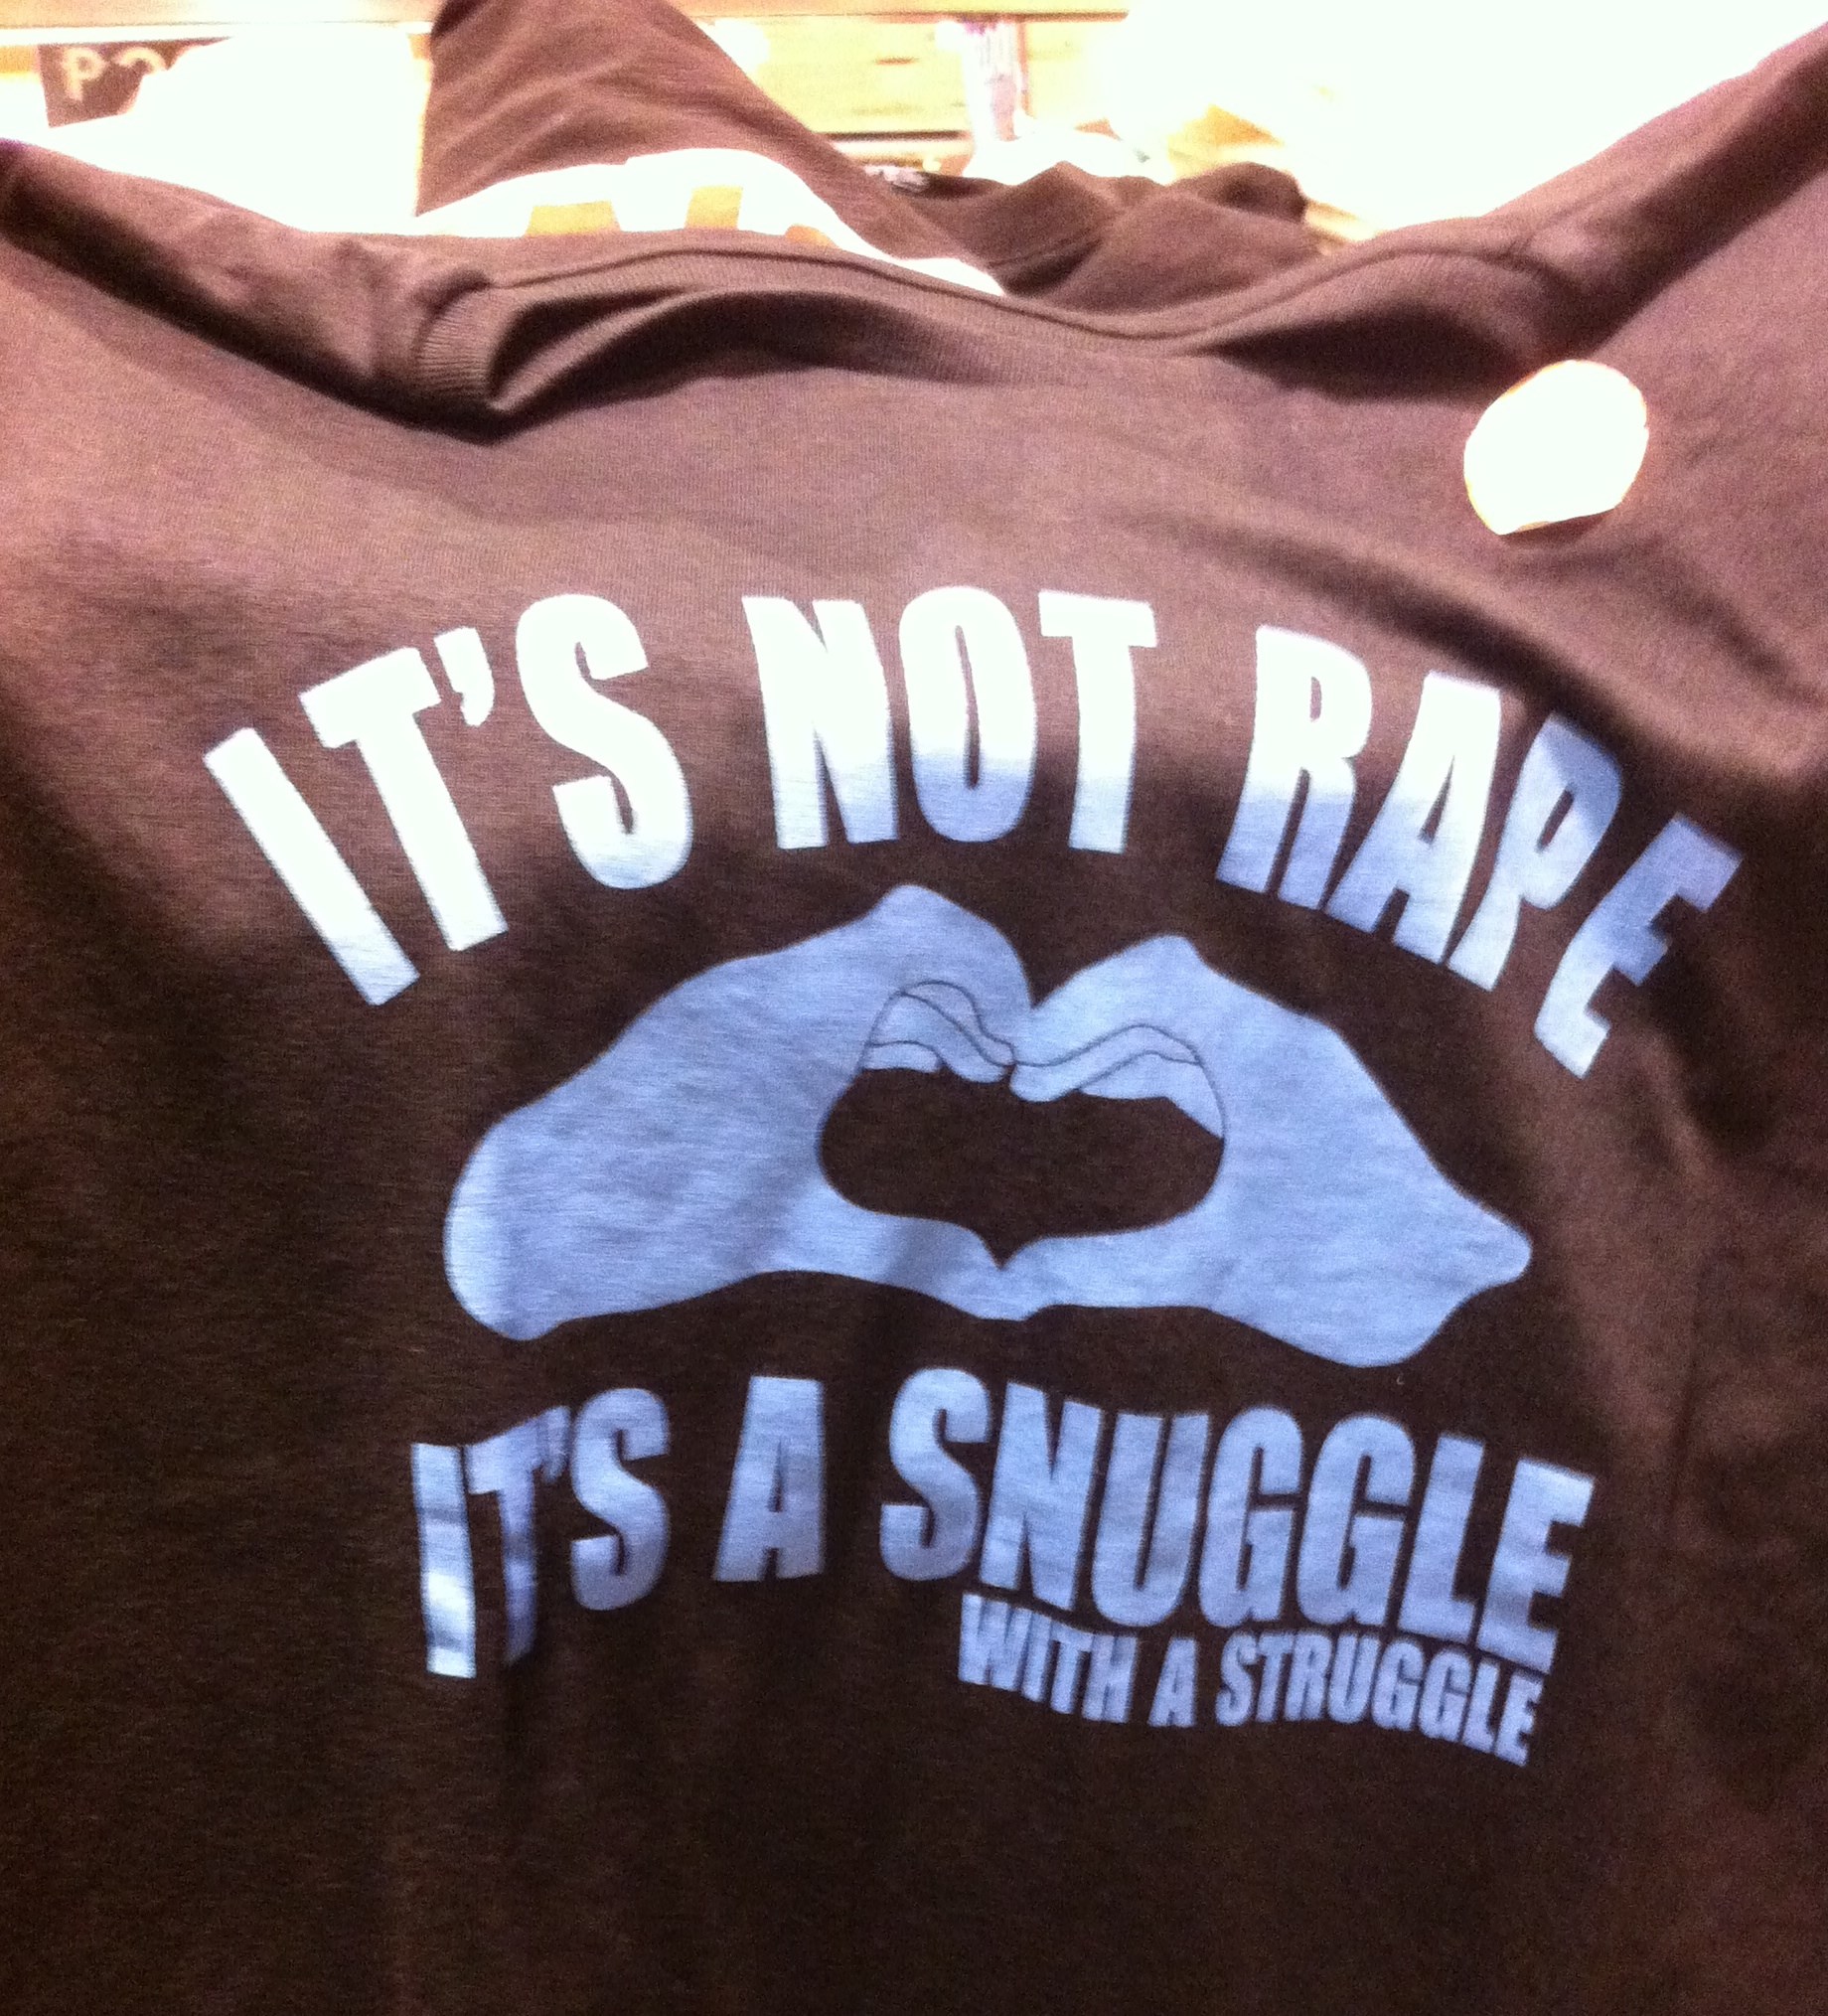 Rape shirt spotted at SM Dept Store | Photo by Karen Kunawicz